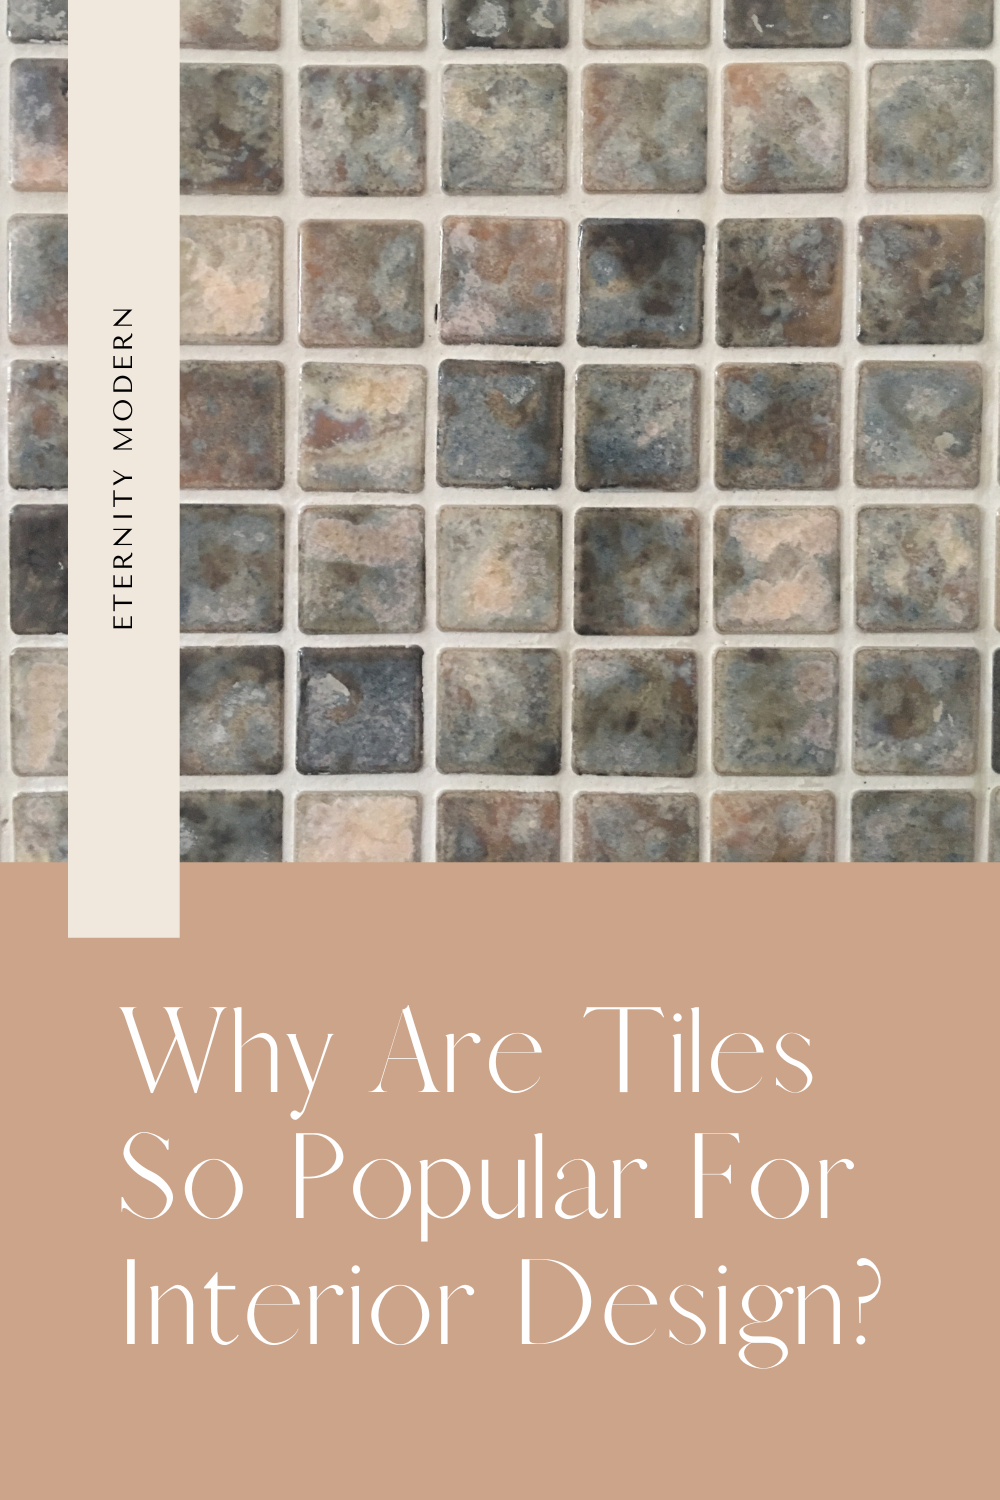 Why Are Tiles So Popular For Interior Design?